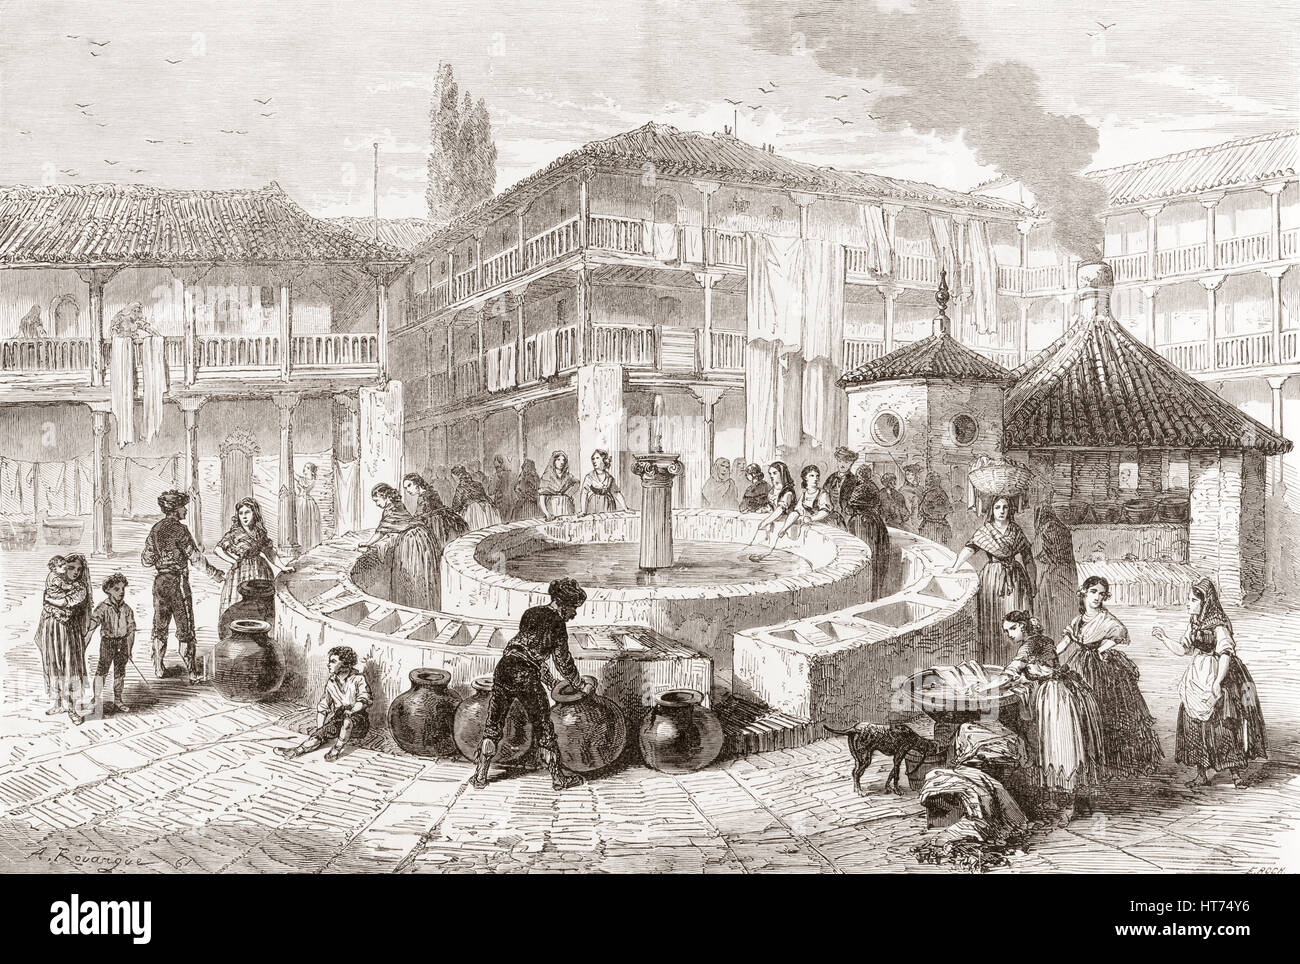 The Corral del Conde, Seville, Andalusia, Spain in the 19th century.  From Album-Evenement, Prime du Journal L'Evenement, published 1865. Stock Photo